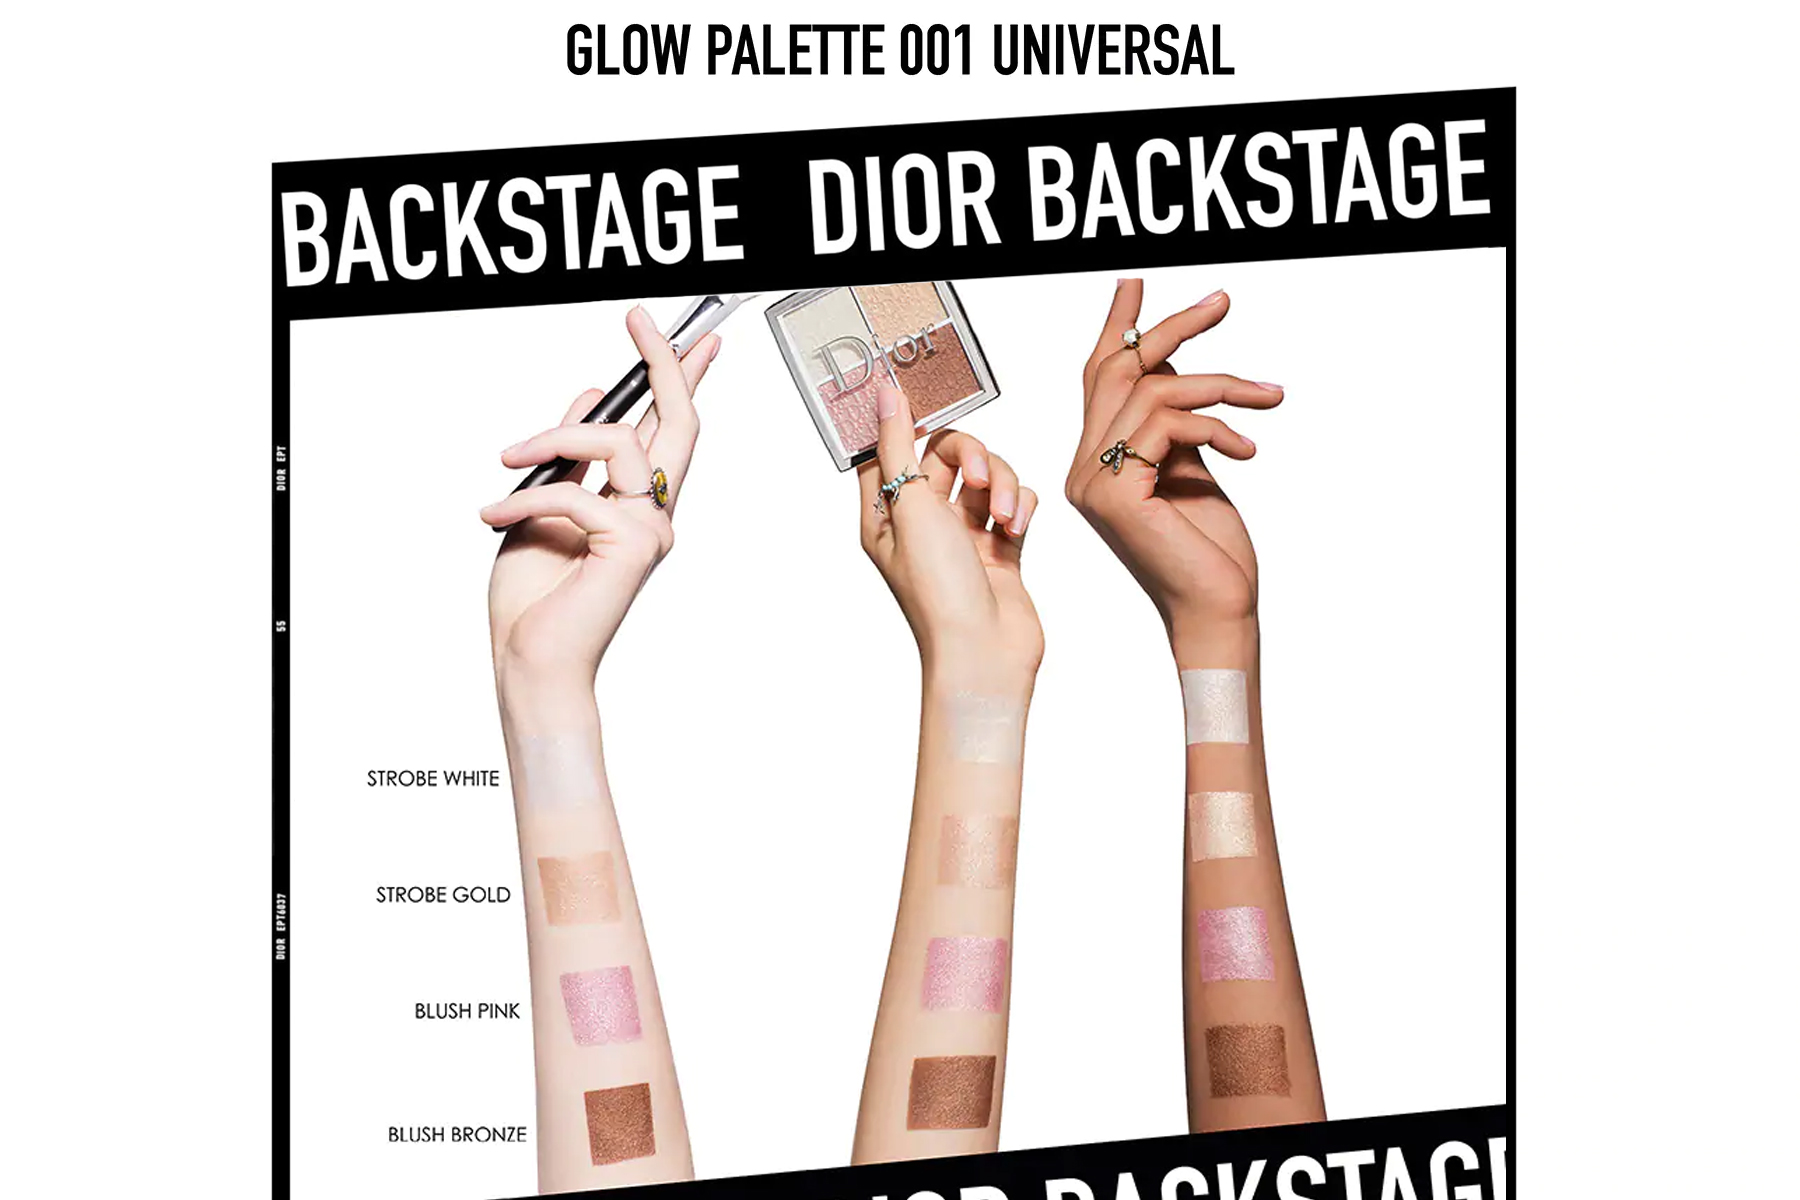 dior-backstage-glow-face-palette-universal-neutral-swatch